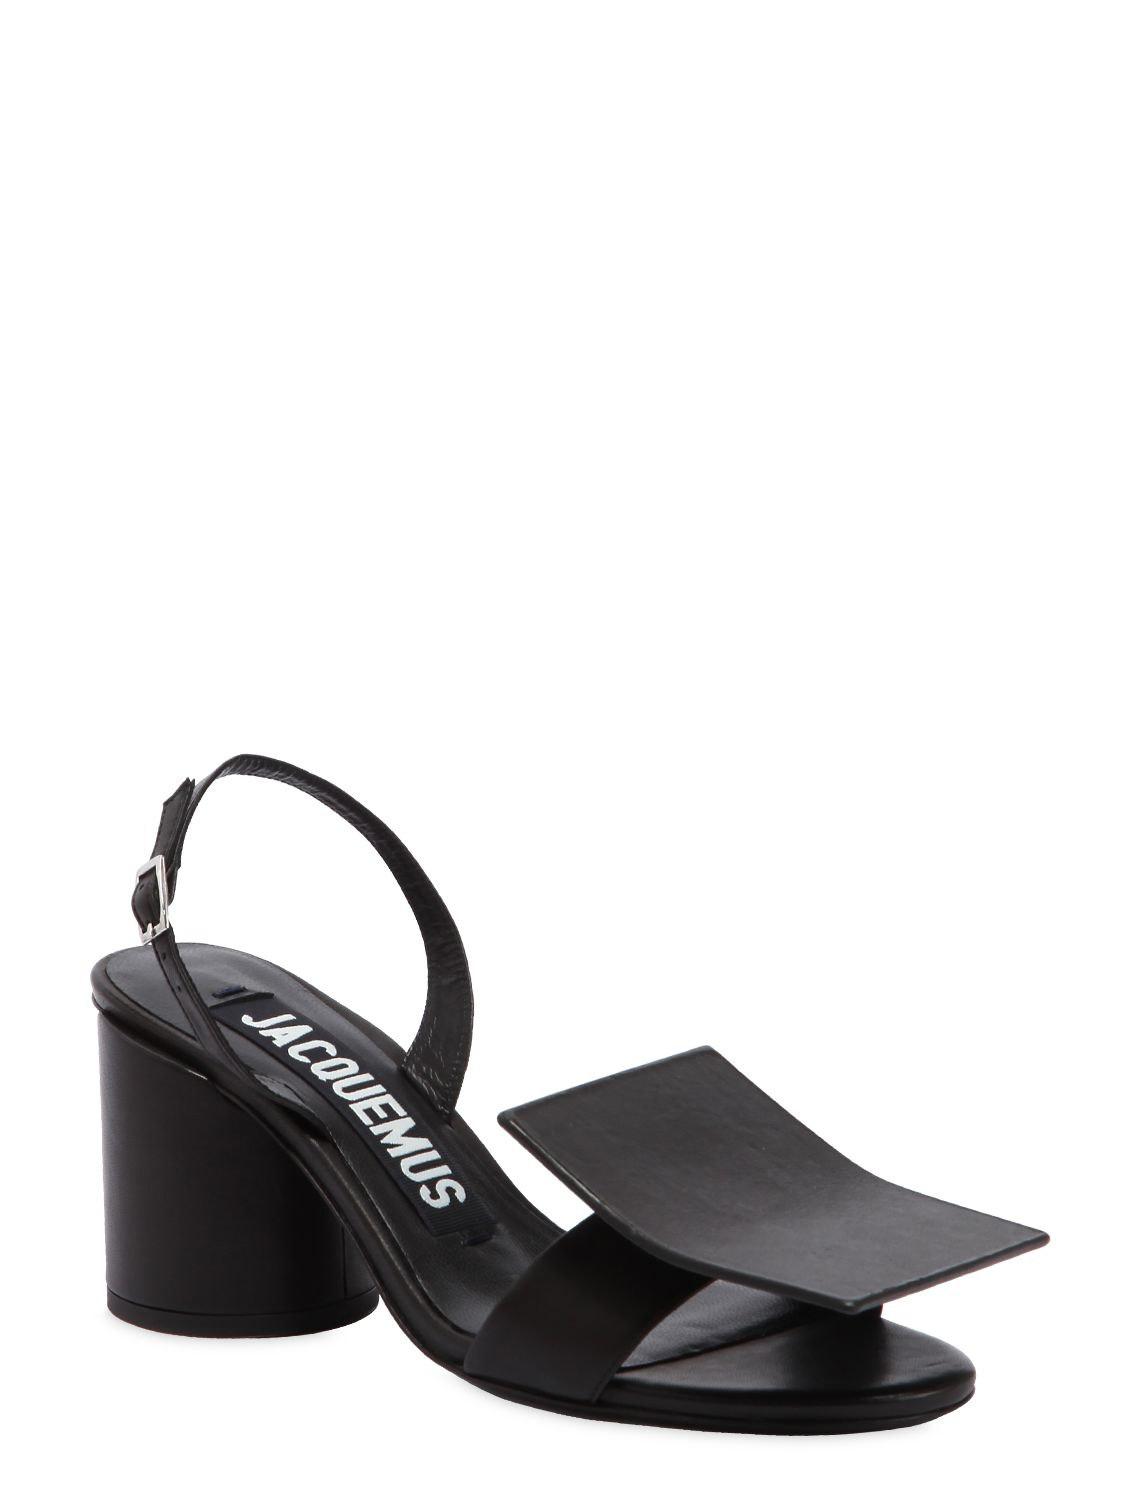 Jacquemus 90mm Square Circle Leather Sandals in Black - Lyst